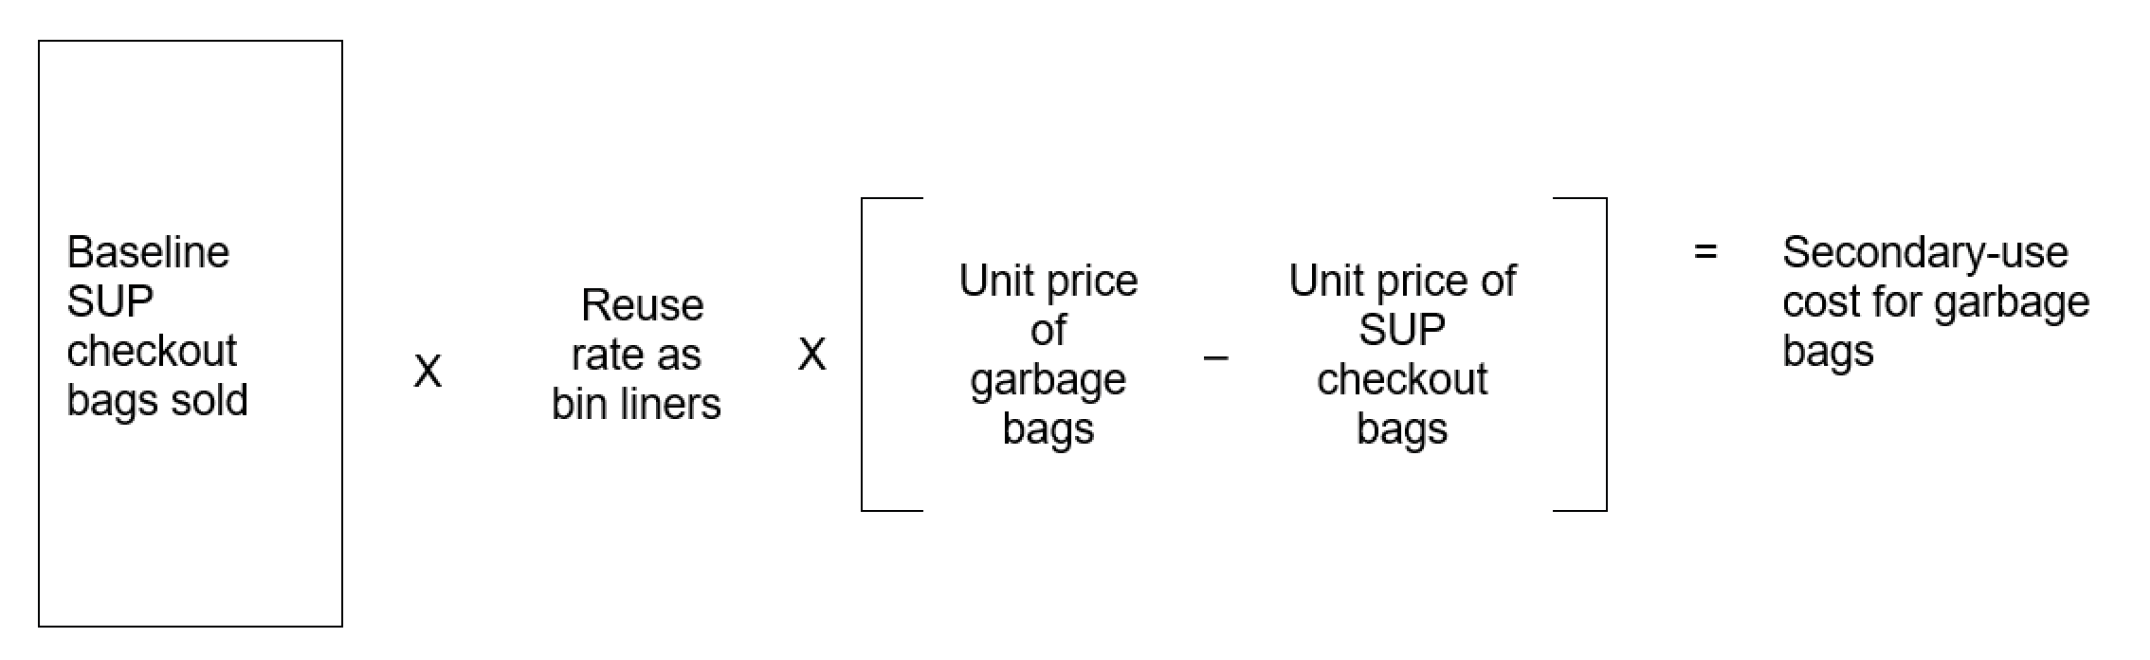 A logic model is presented here illustrating the manner in which the cost-benefit analysis estimates the change in procurement cost for garbage bags versus SUP checkout bags. – Text version below the image